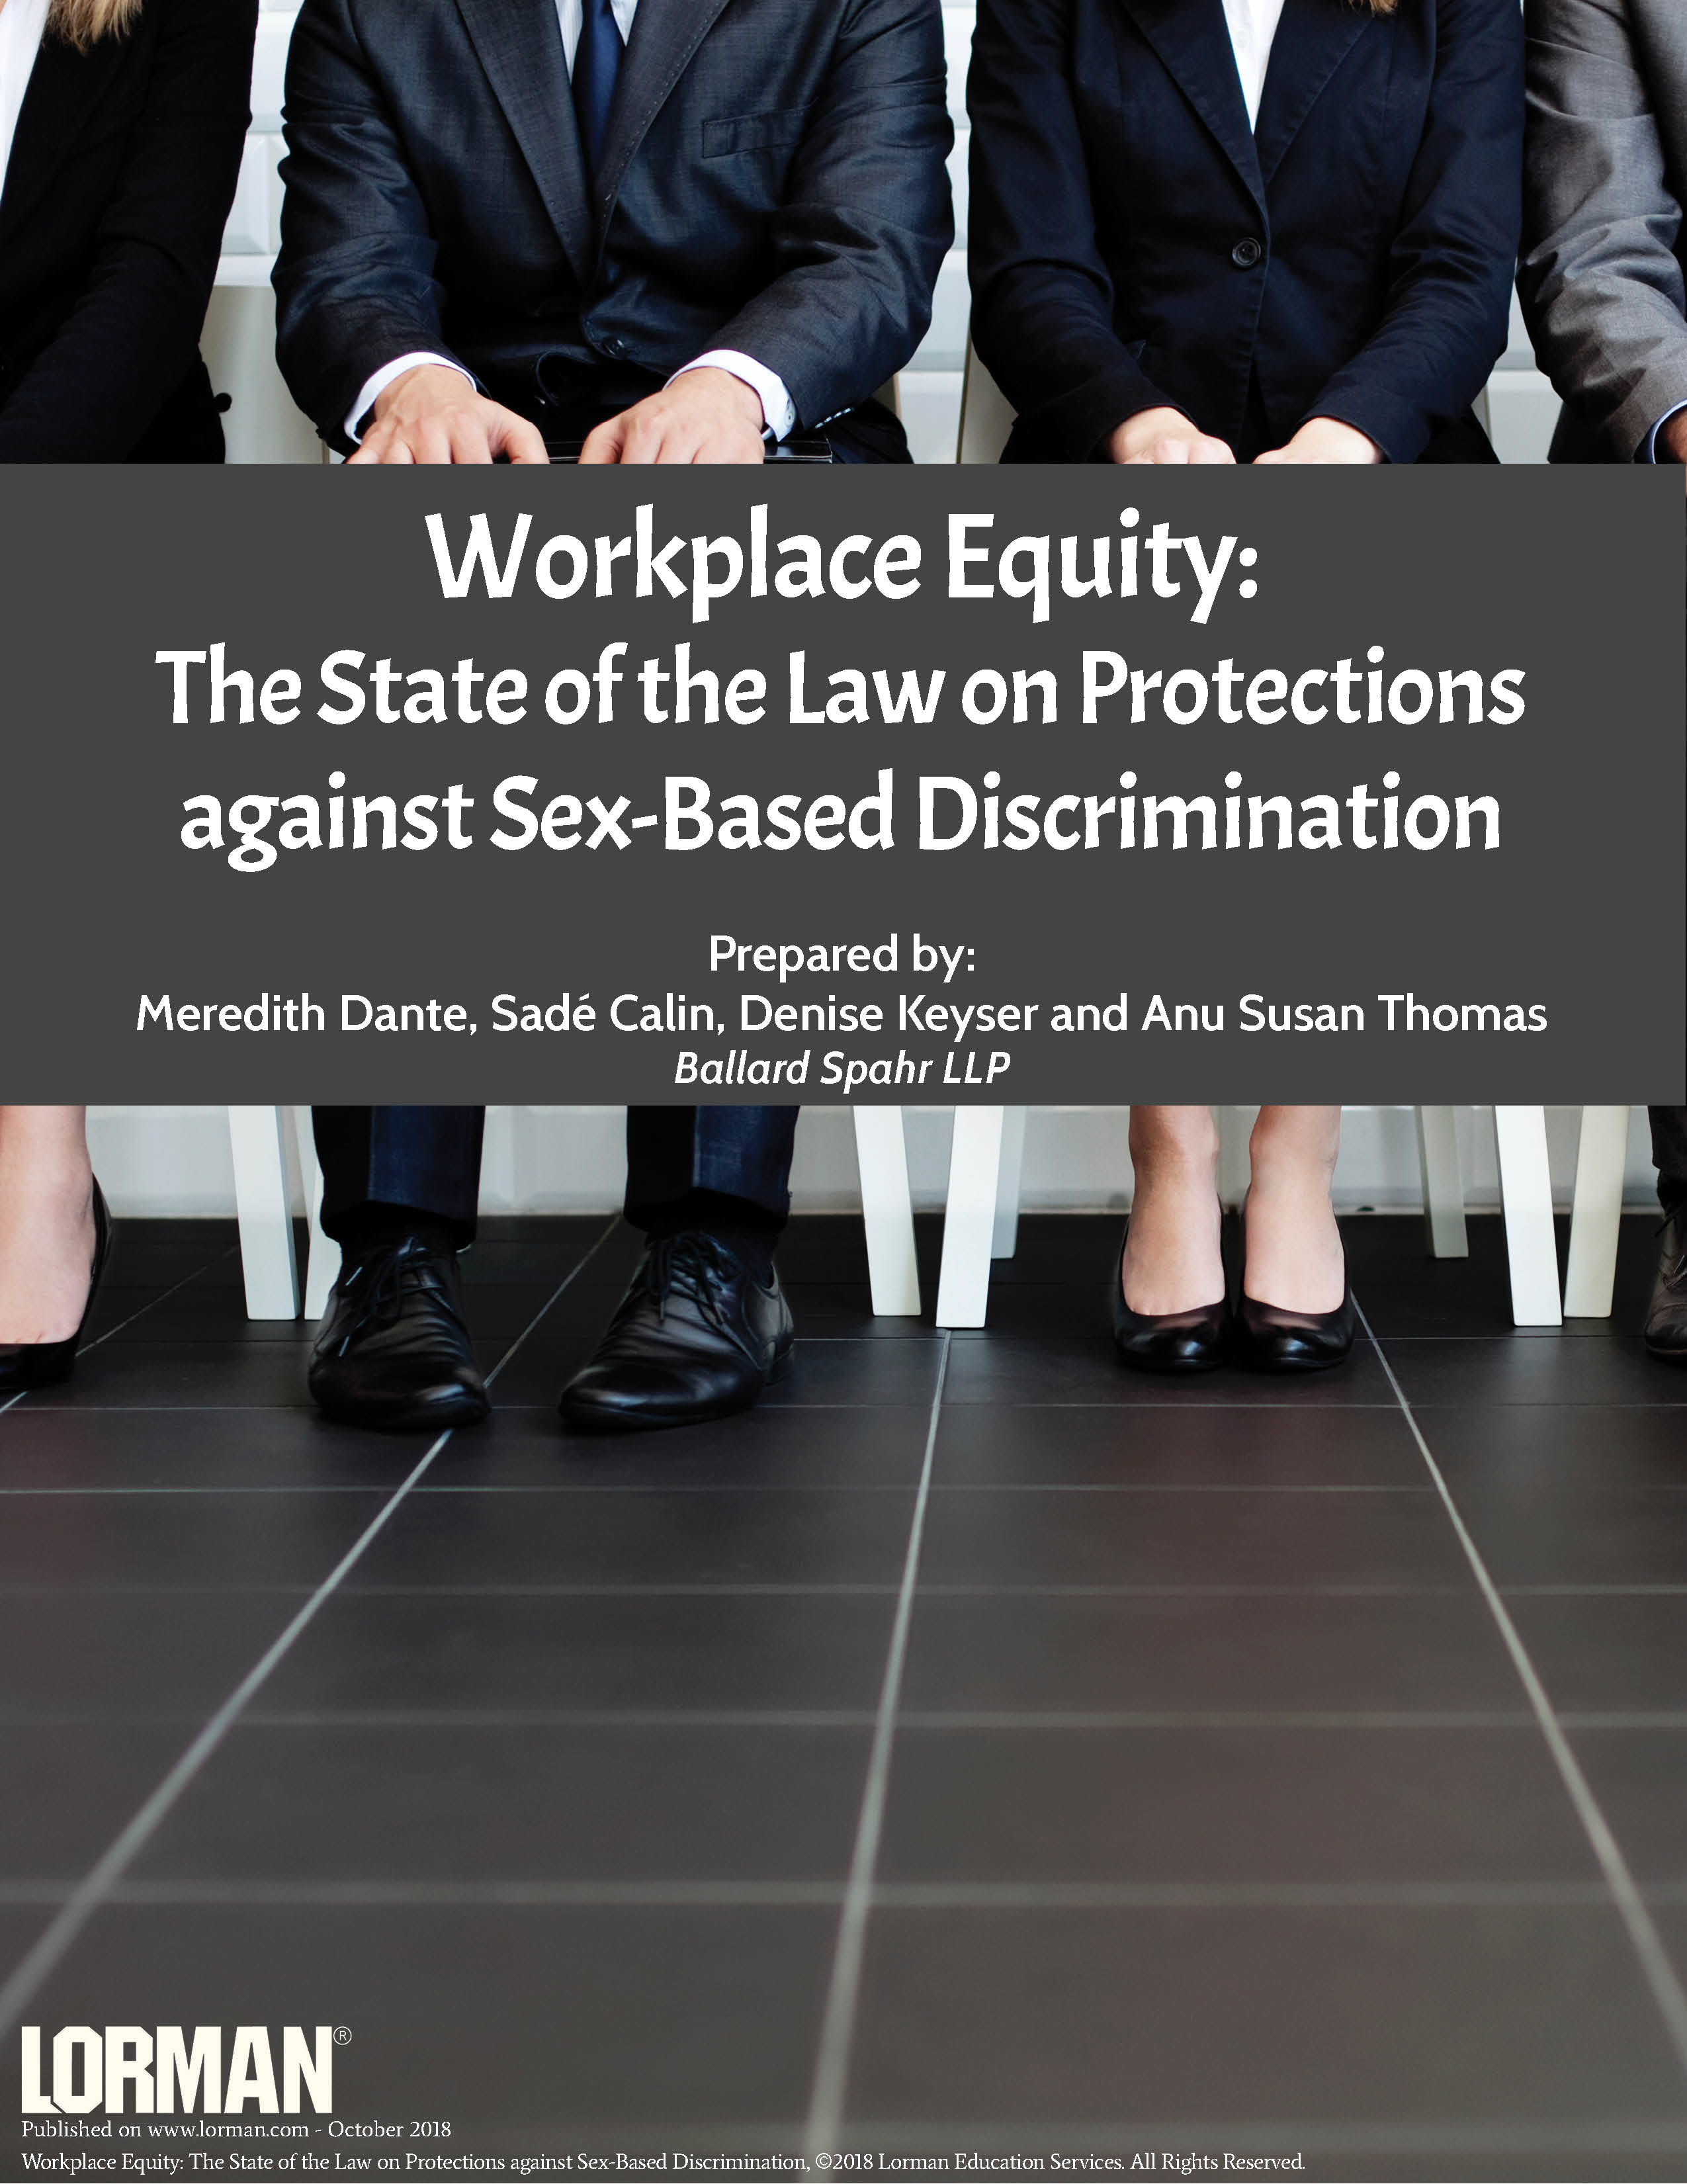 Workplace Equity: The State of the Law on Protections against Sex-Based Discrimination